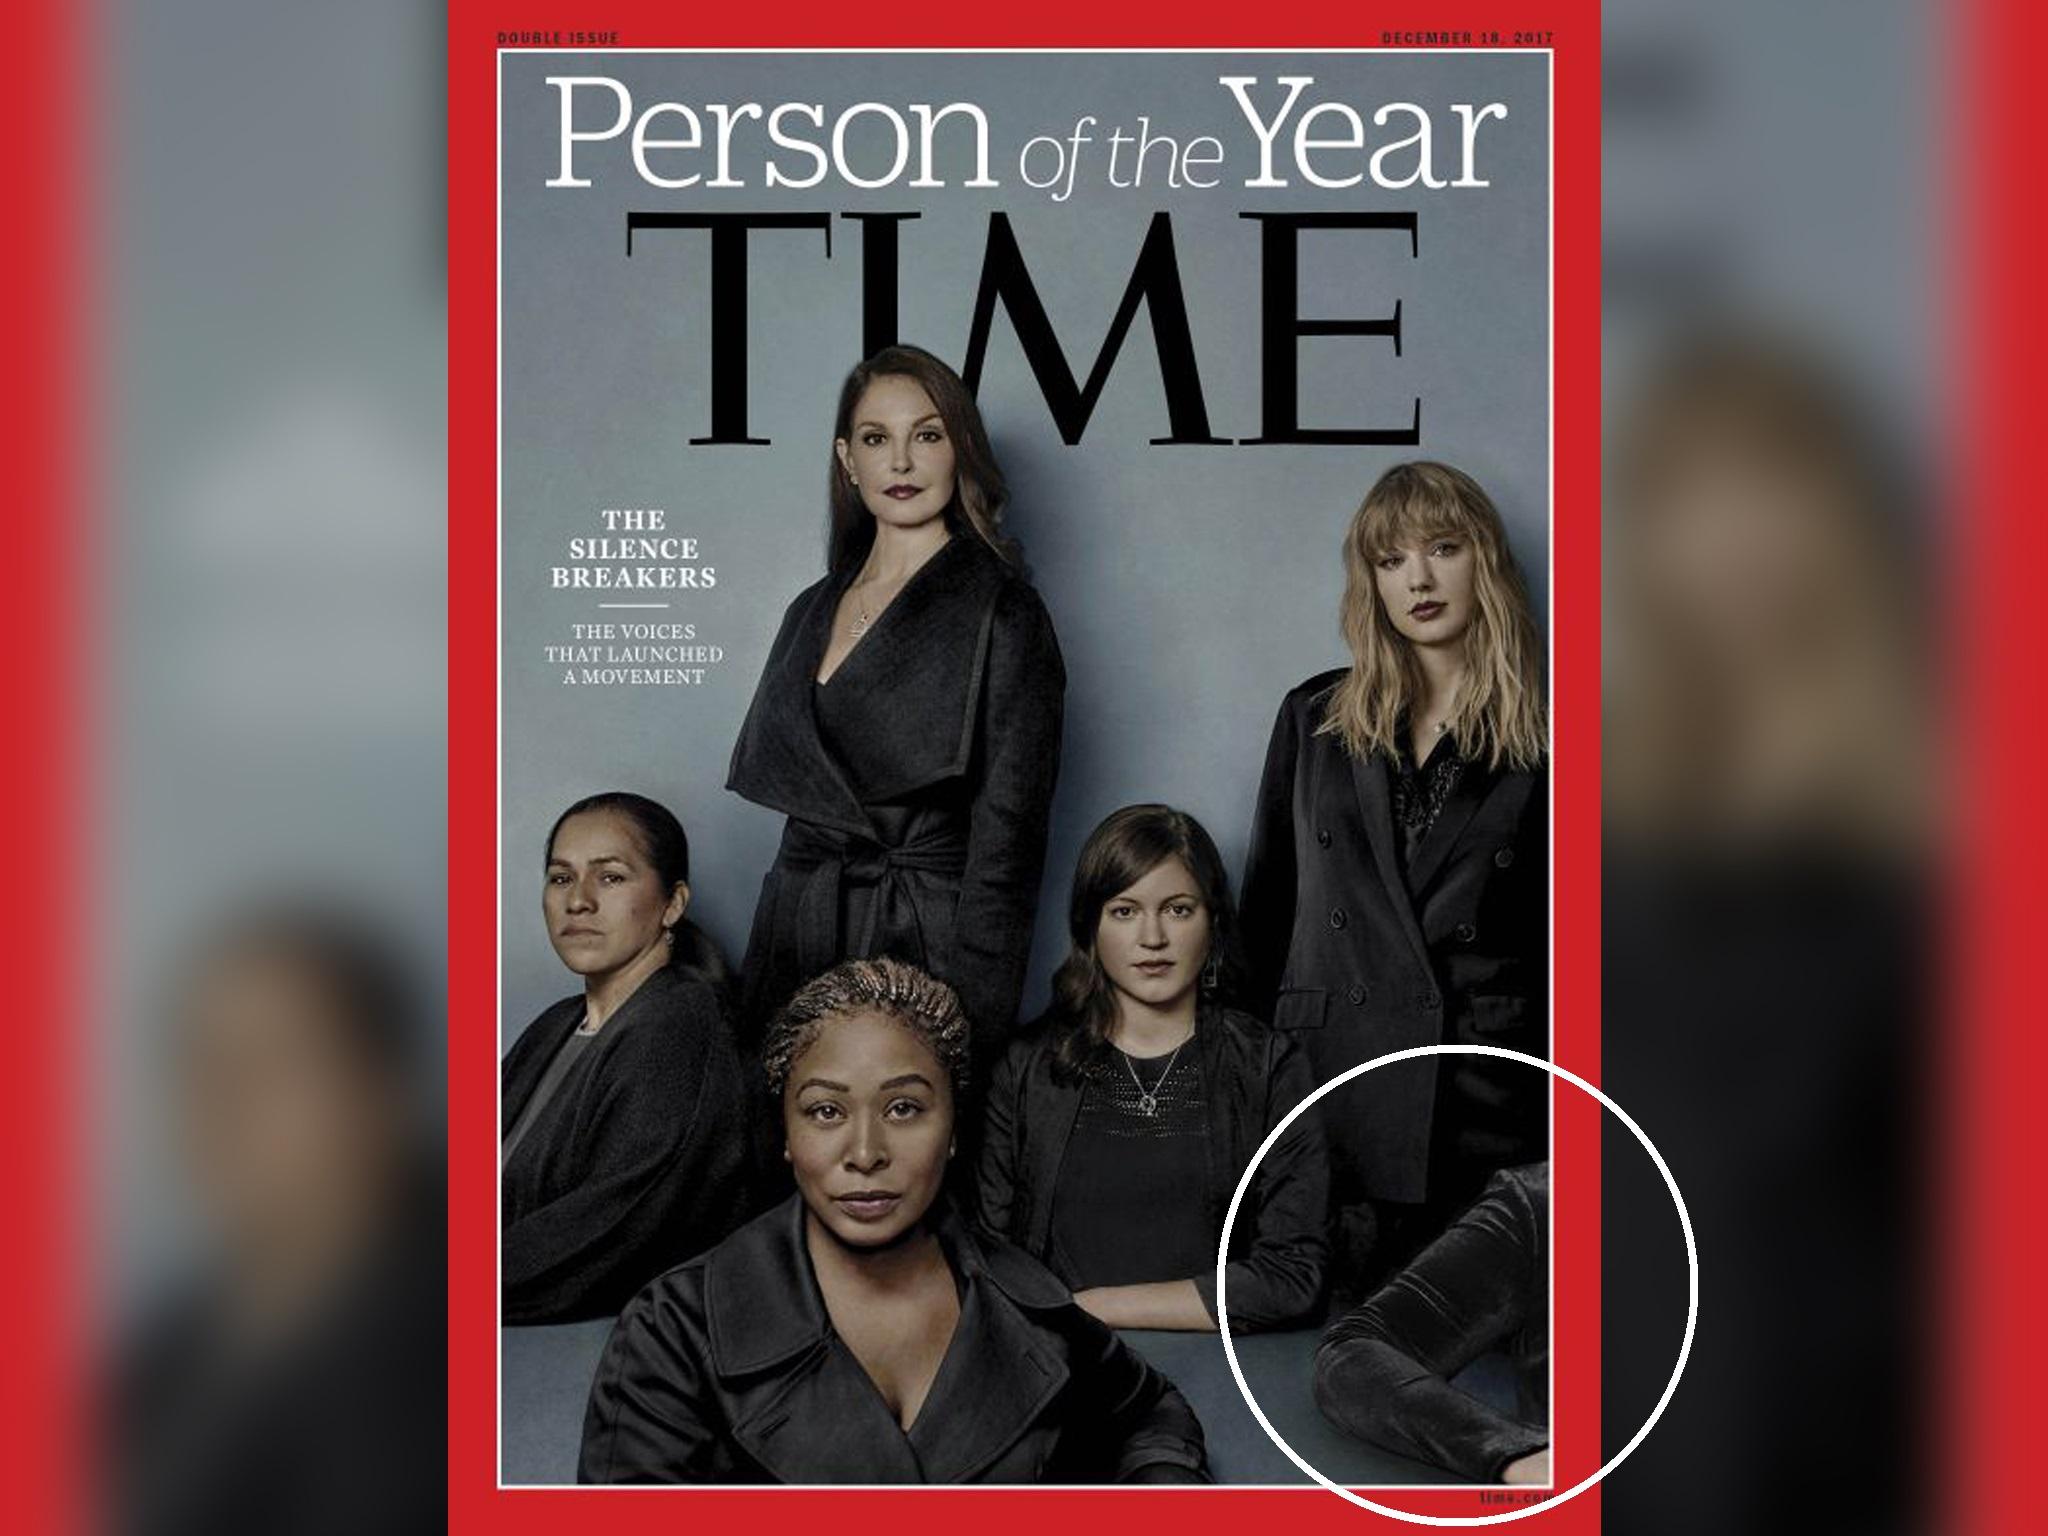 The anonymous woman's elbow appears on Time's 'person of the year' cover